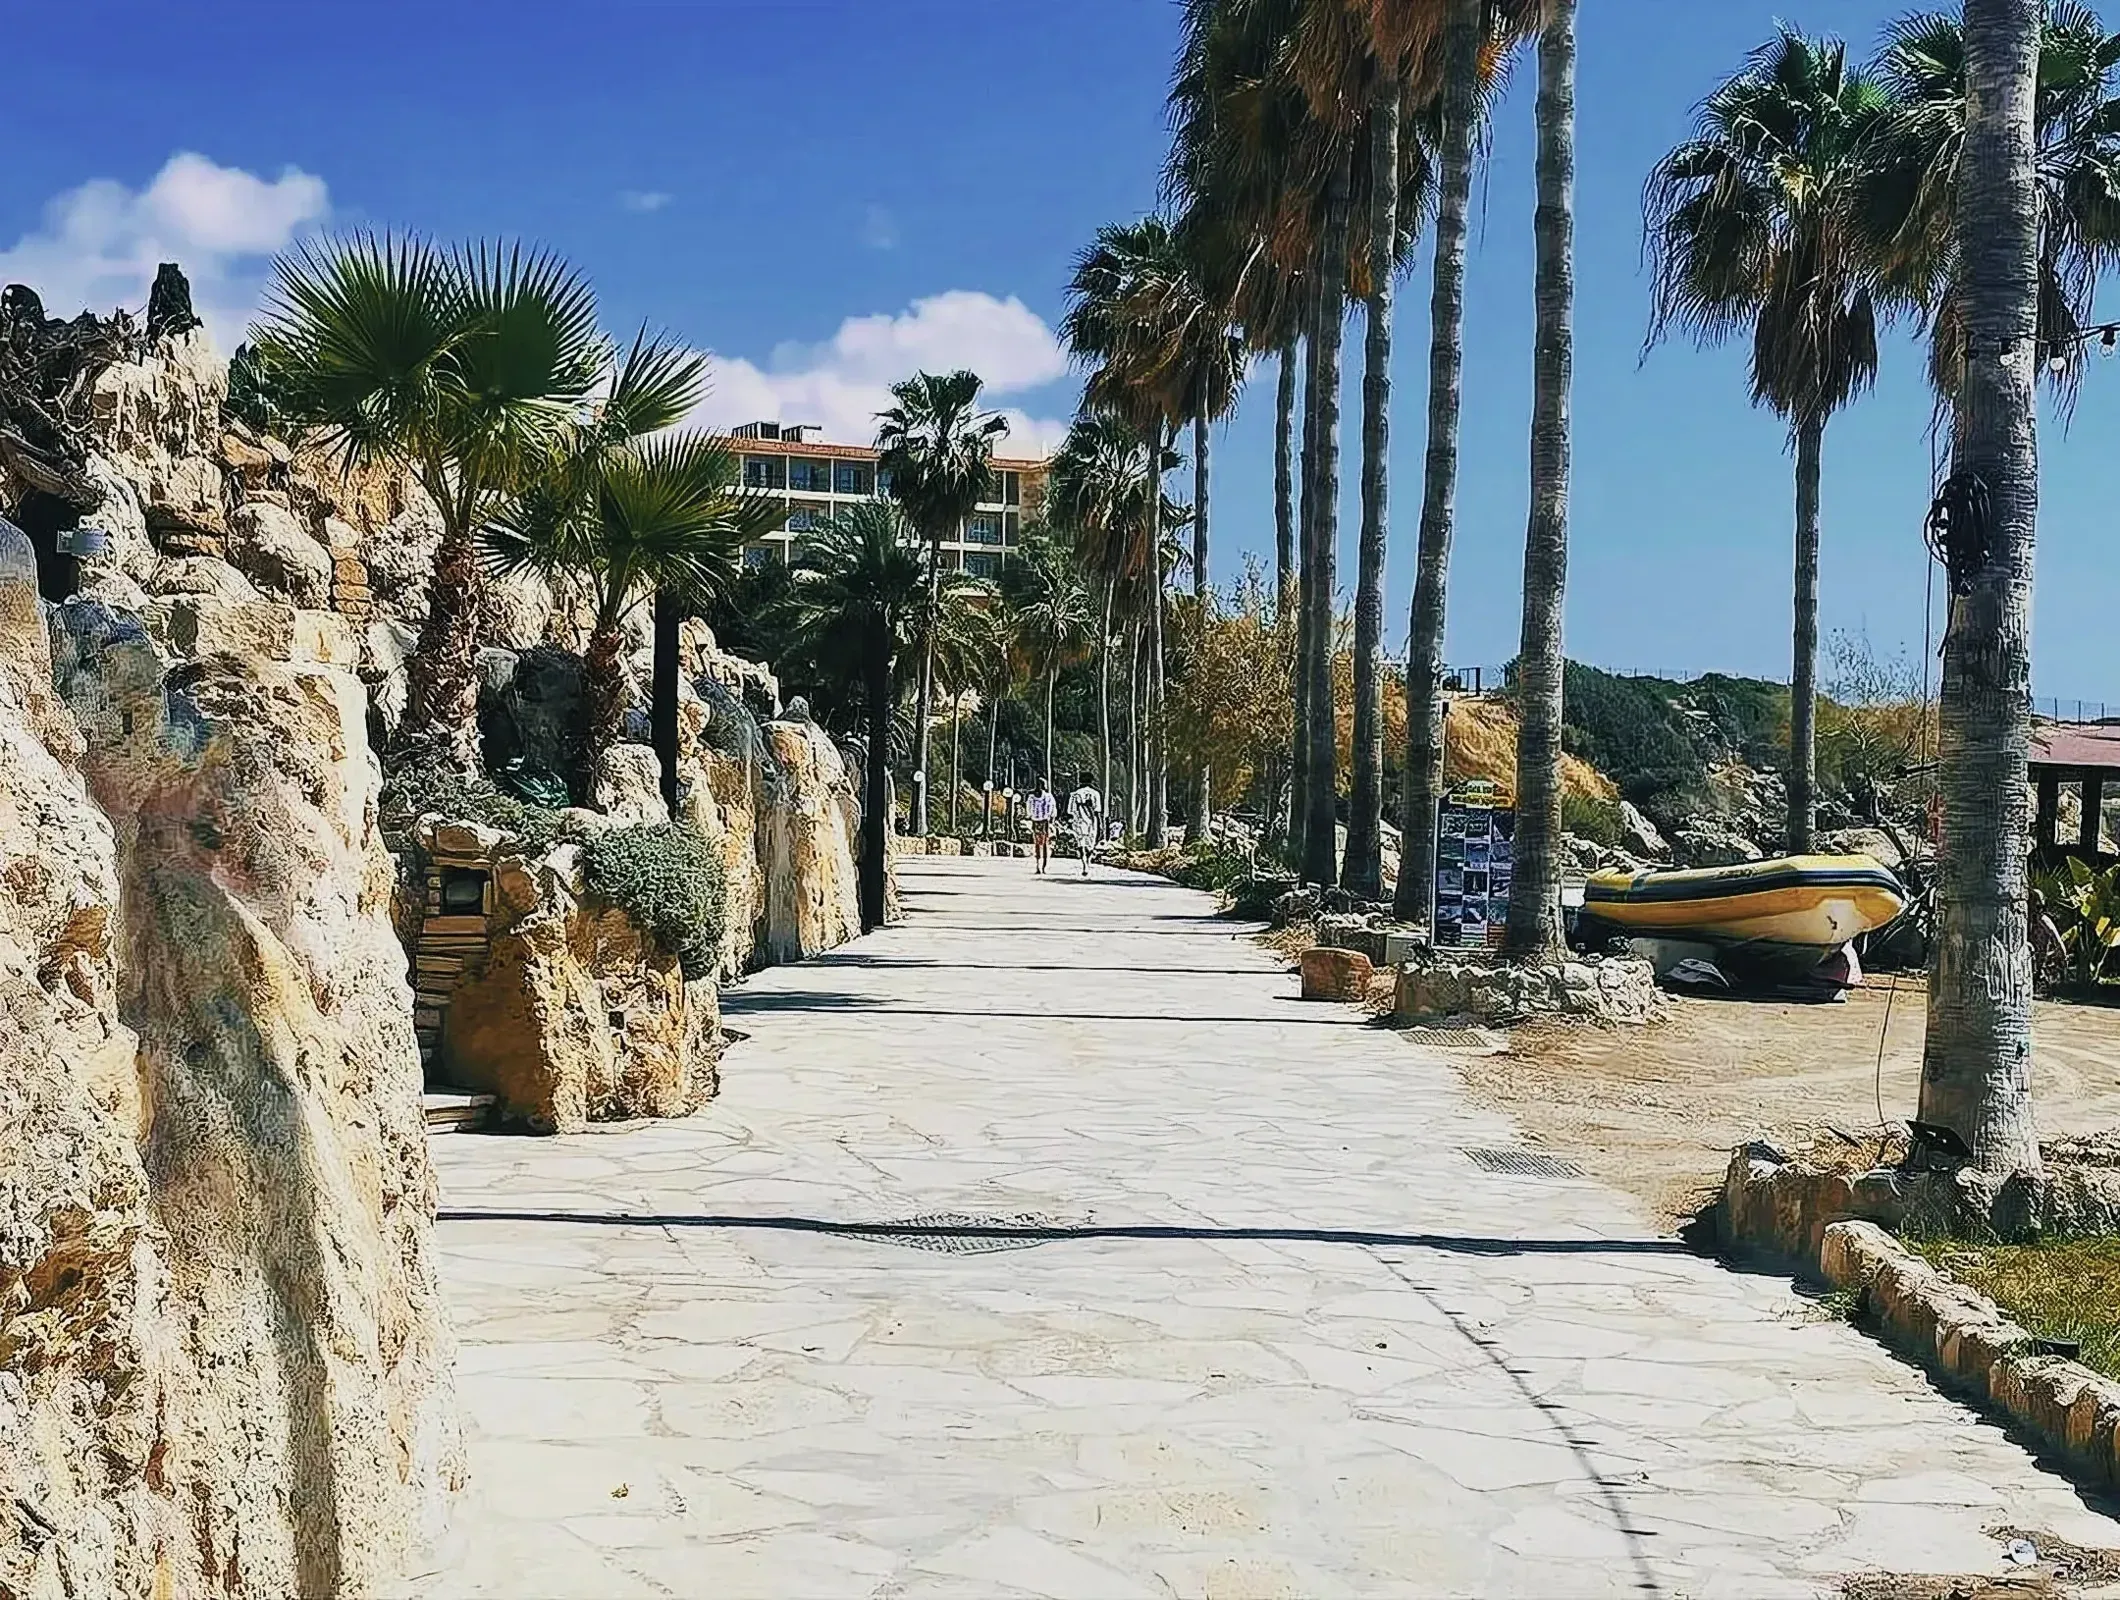 A picturesque view of Coral Bay in Cyprus with palm trees, a well-trodden path, and a boat resting on the side.